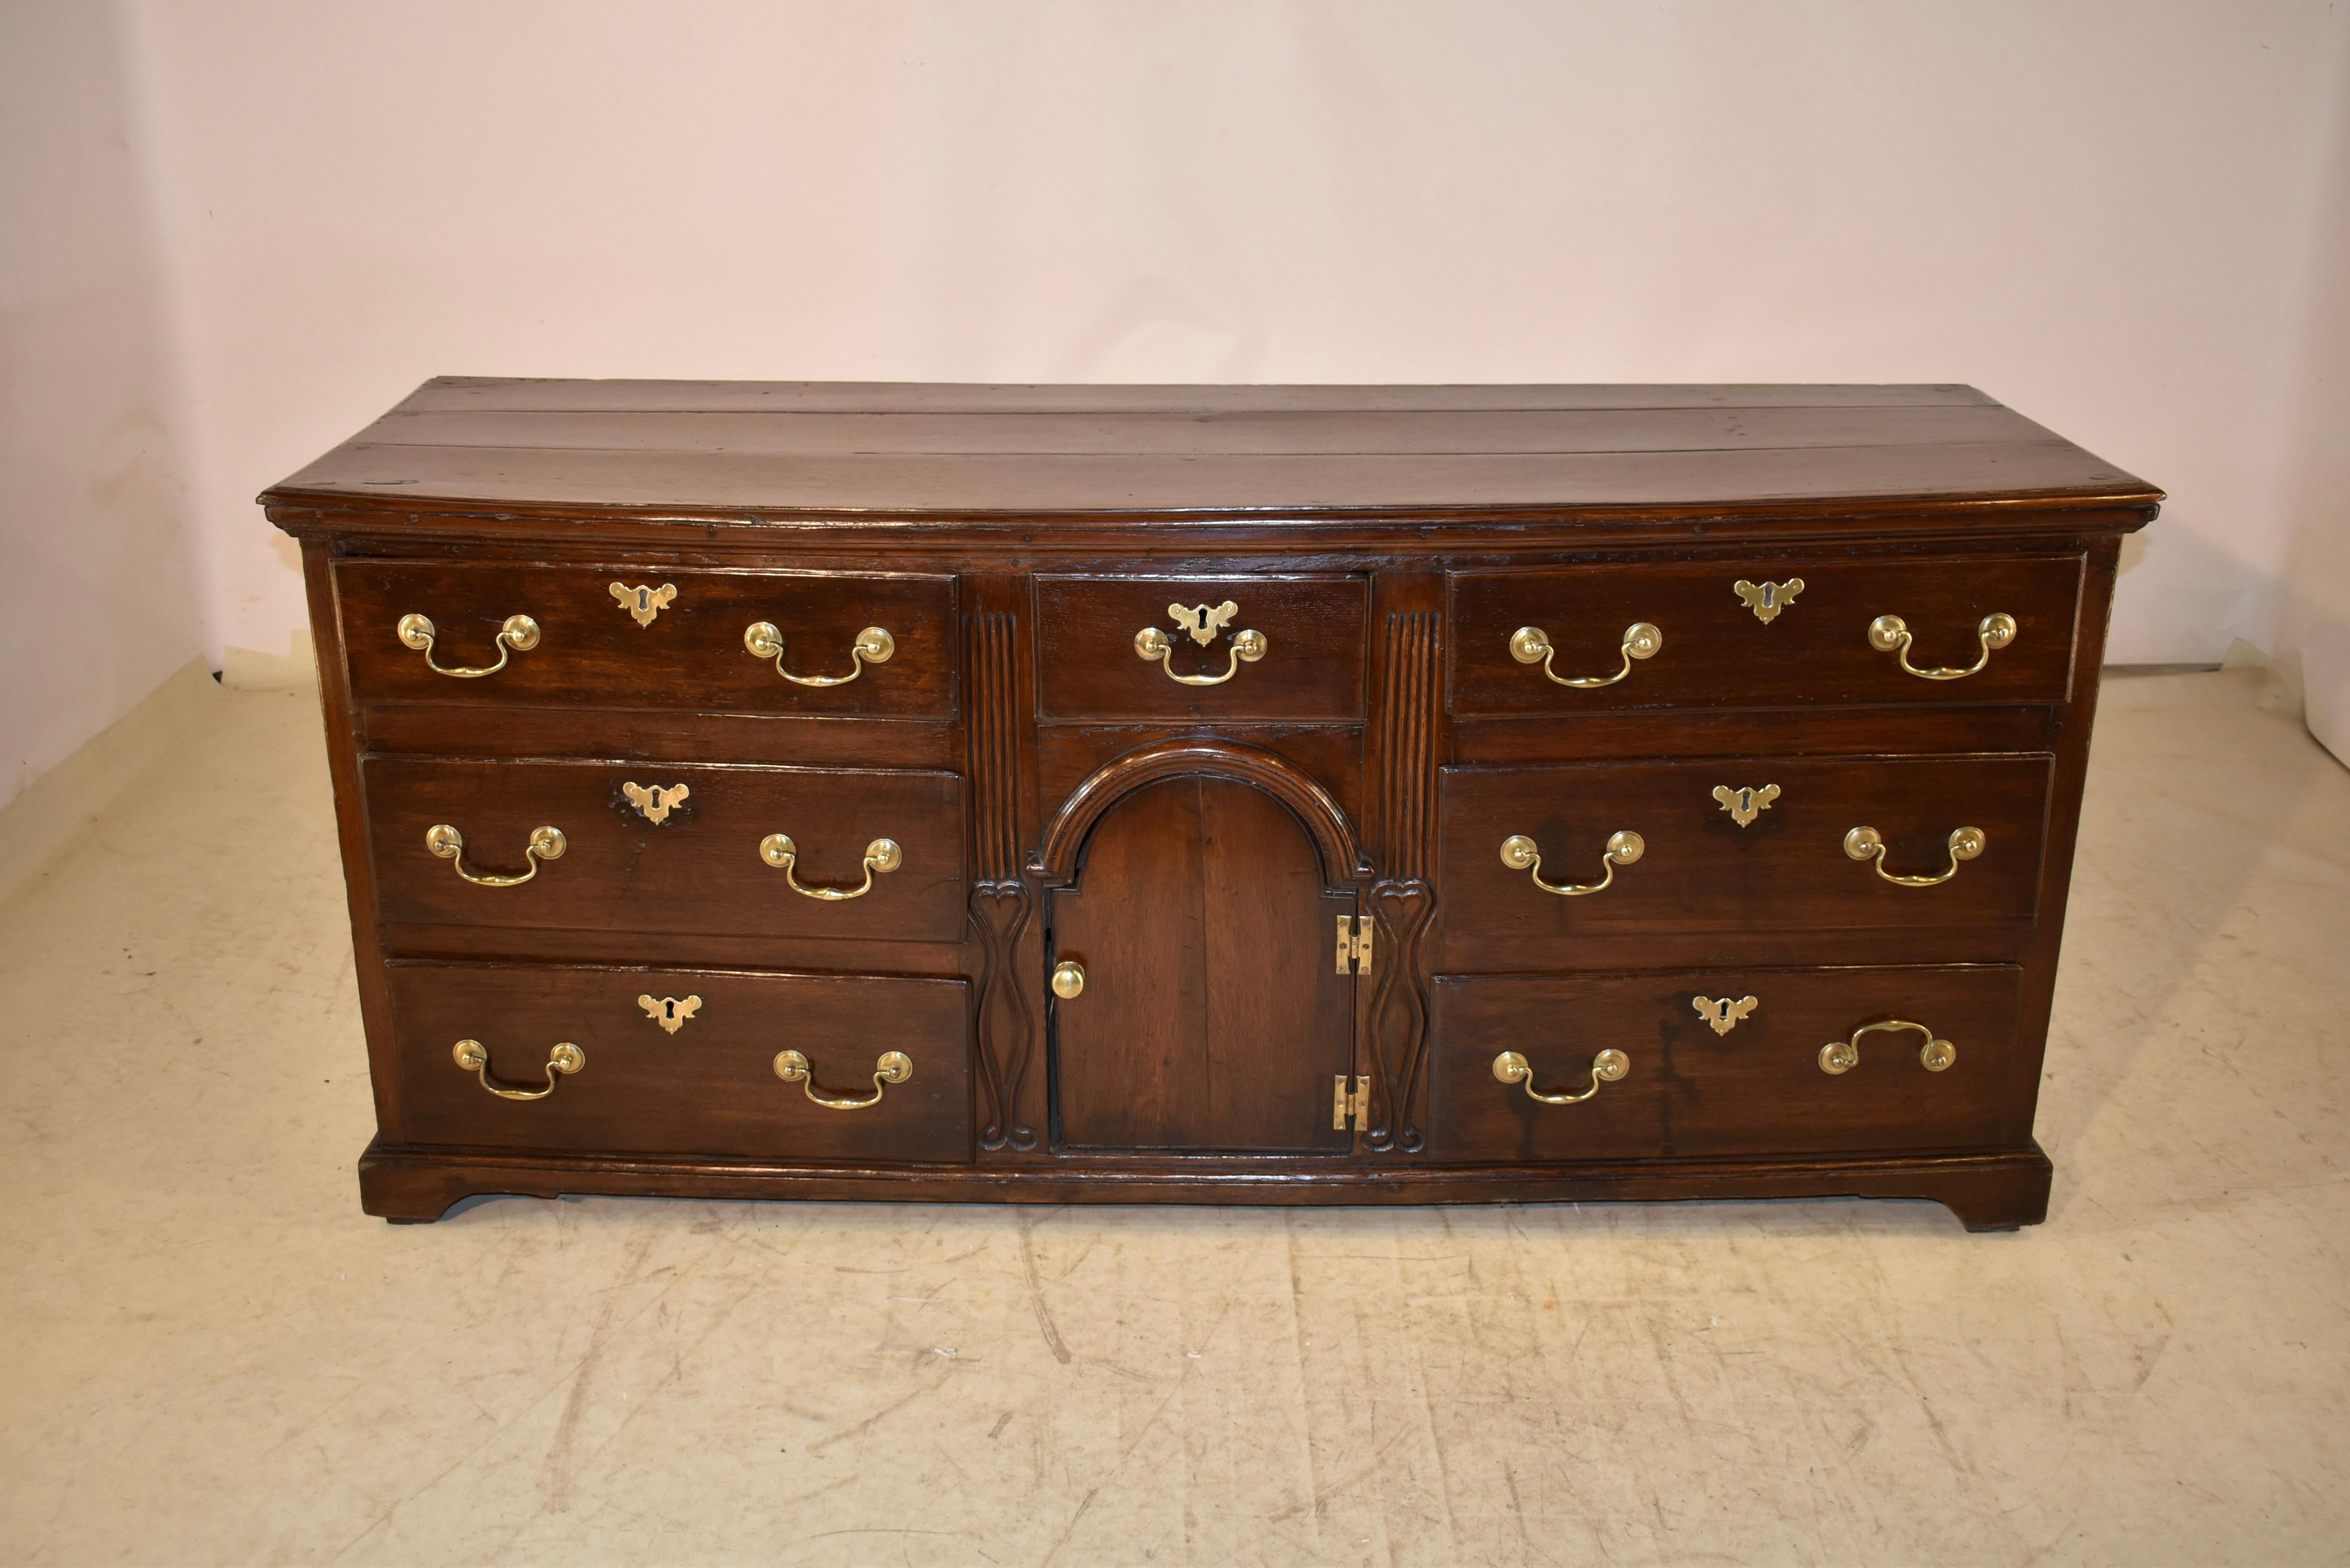 Mid- 18th century oak dresser base from England.  The top is made from  three planks and has a beveled edge. the sides have three panels, also with beveled edges for a simple and elegant feel.  The case is comprised of two banks of three drawers